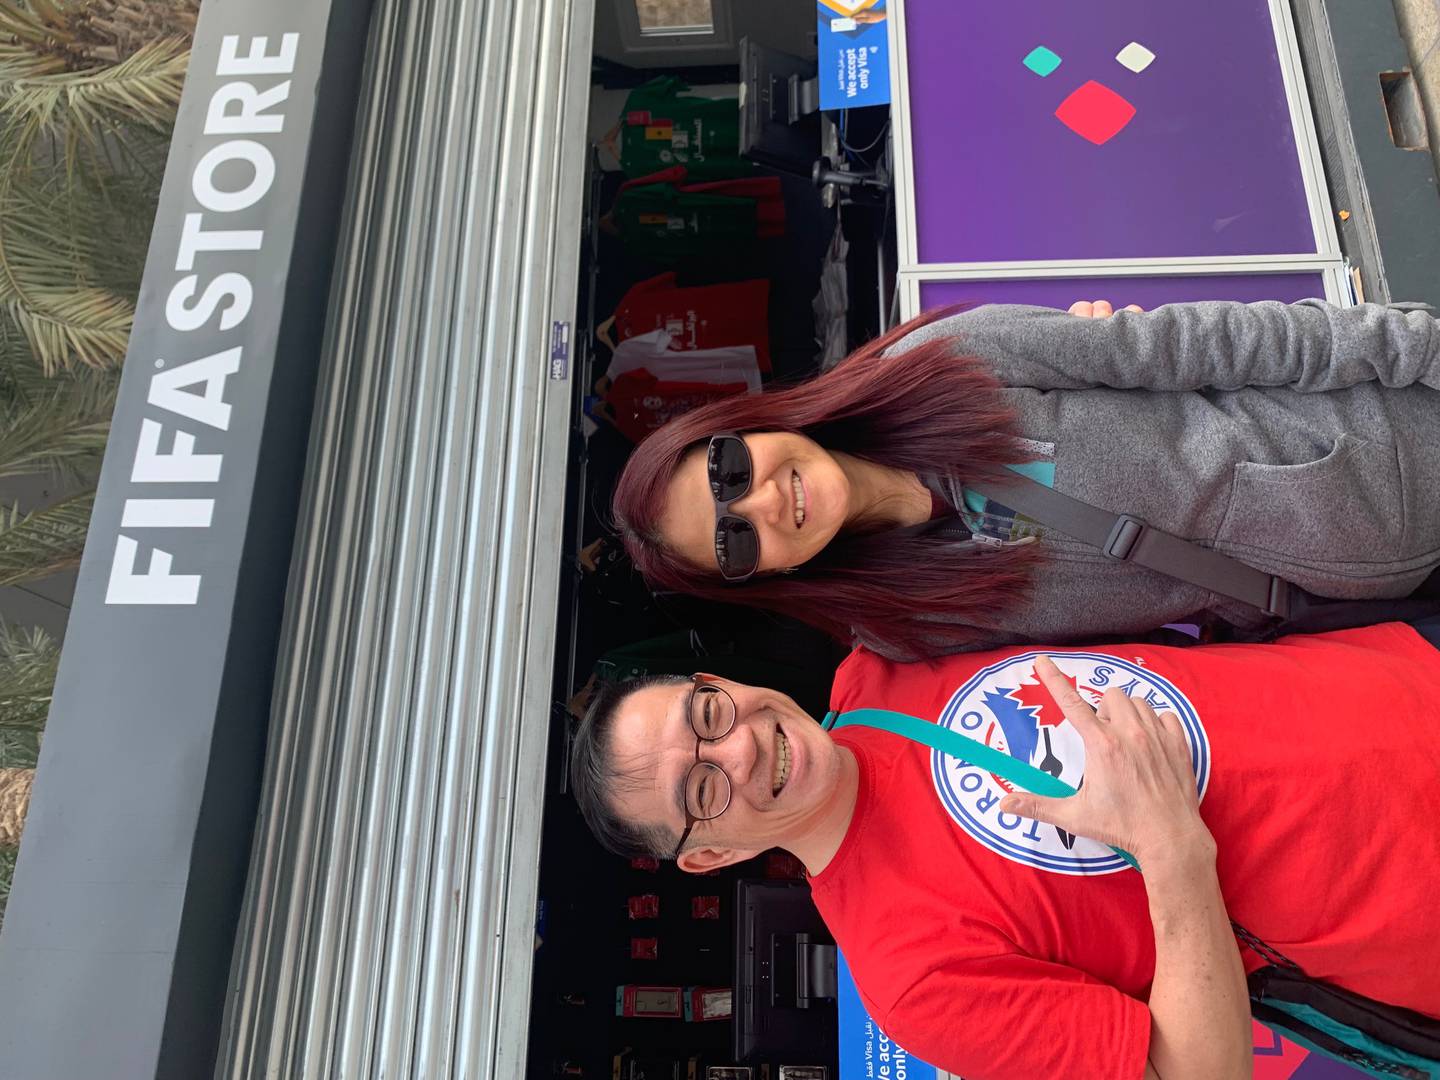 Paul Liew, pictured with his wife, said he waited for four hours in an online queue for an Argentina v Croatia ticket. Ali Al Shouk / The National